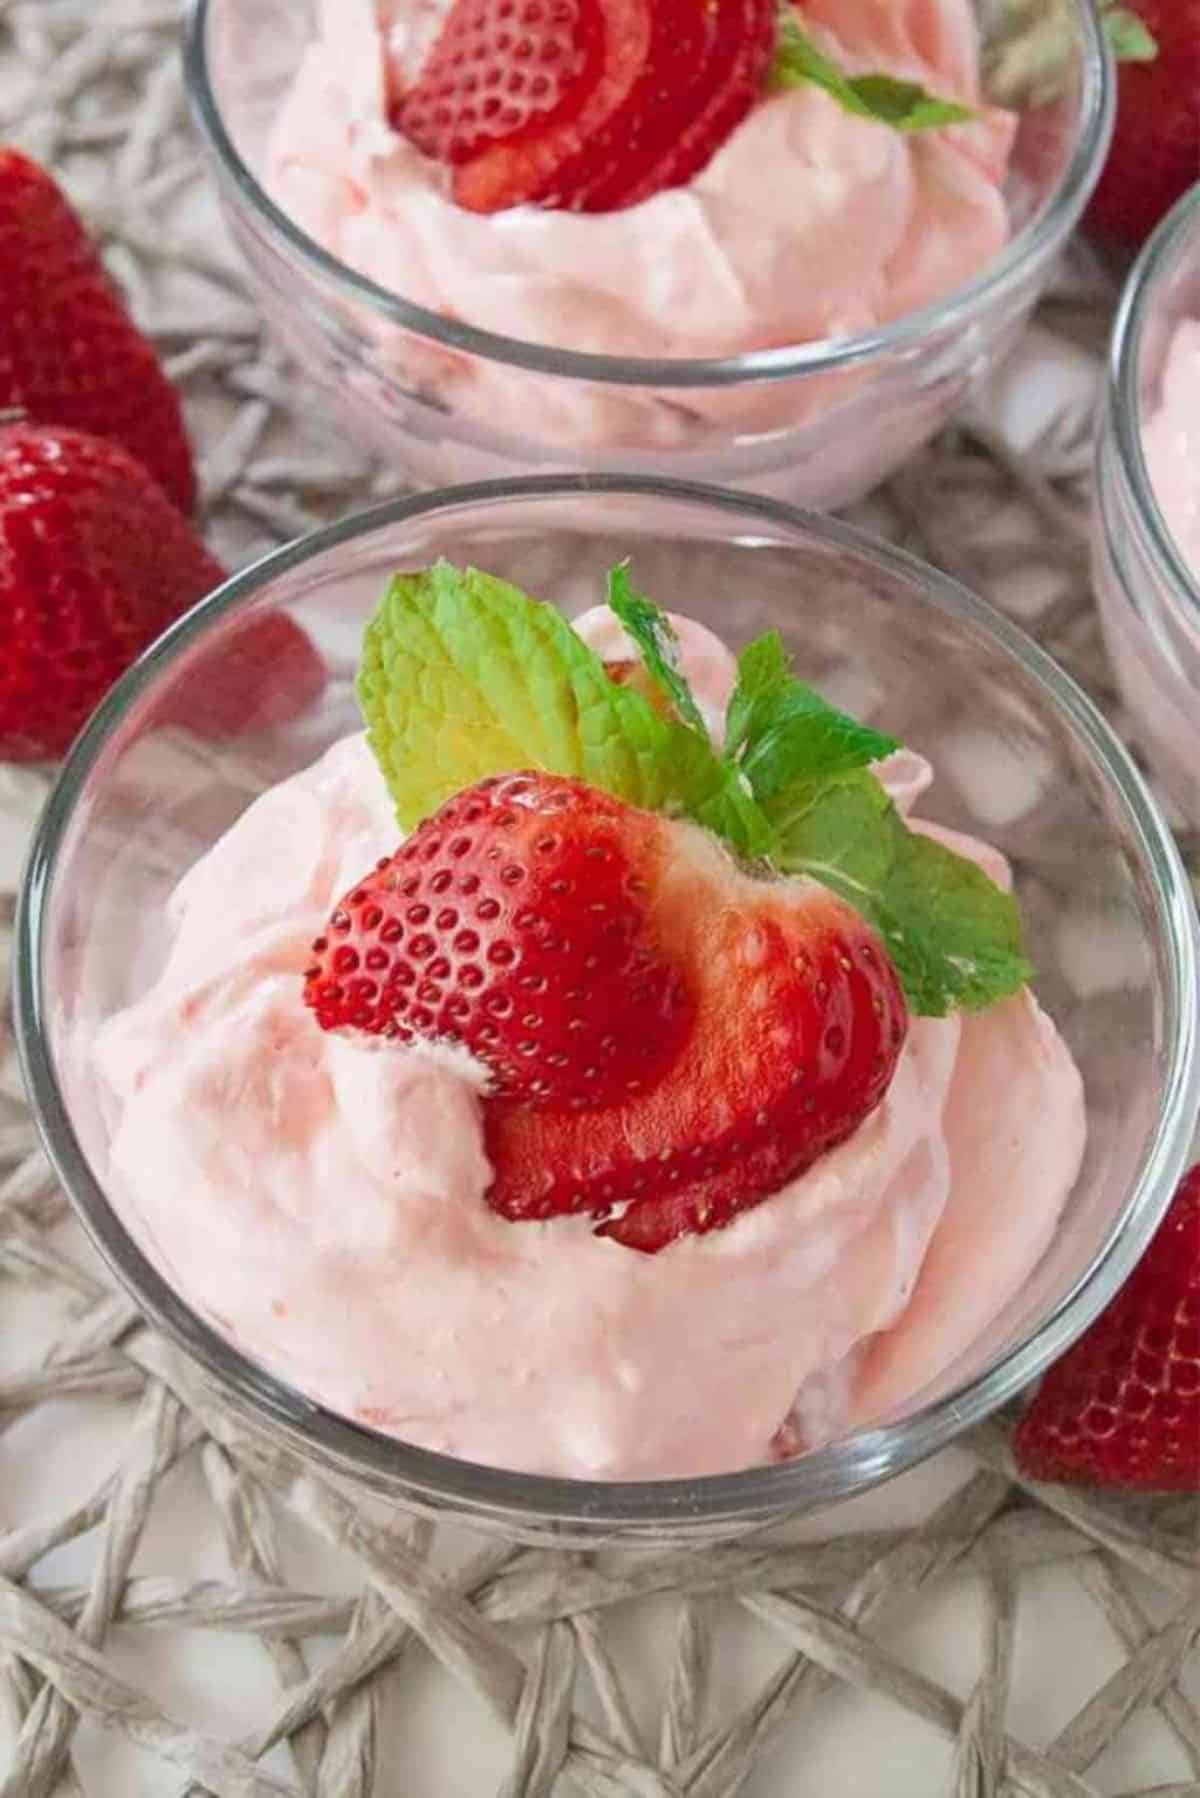 Berries and Cream Jello Salad in small glass bowls.